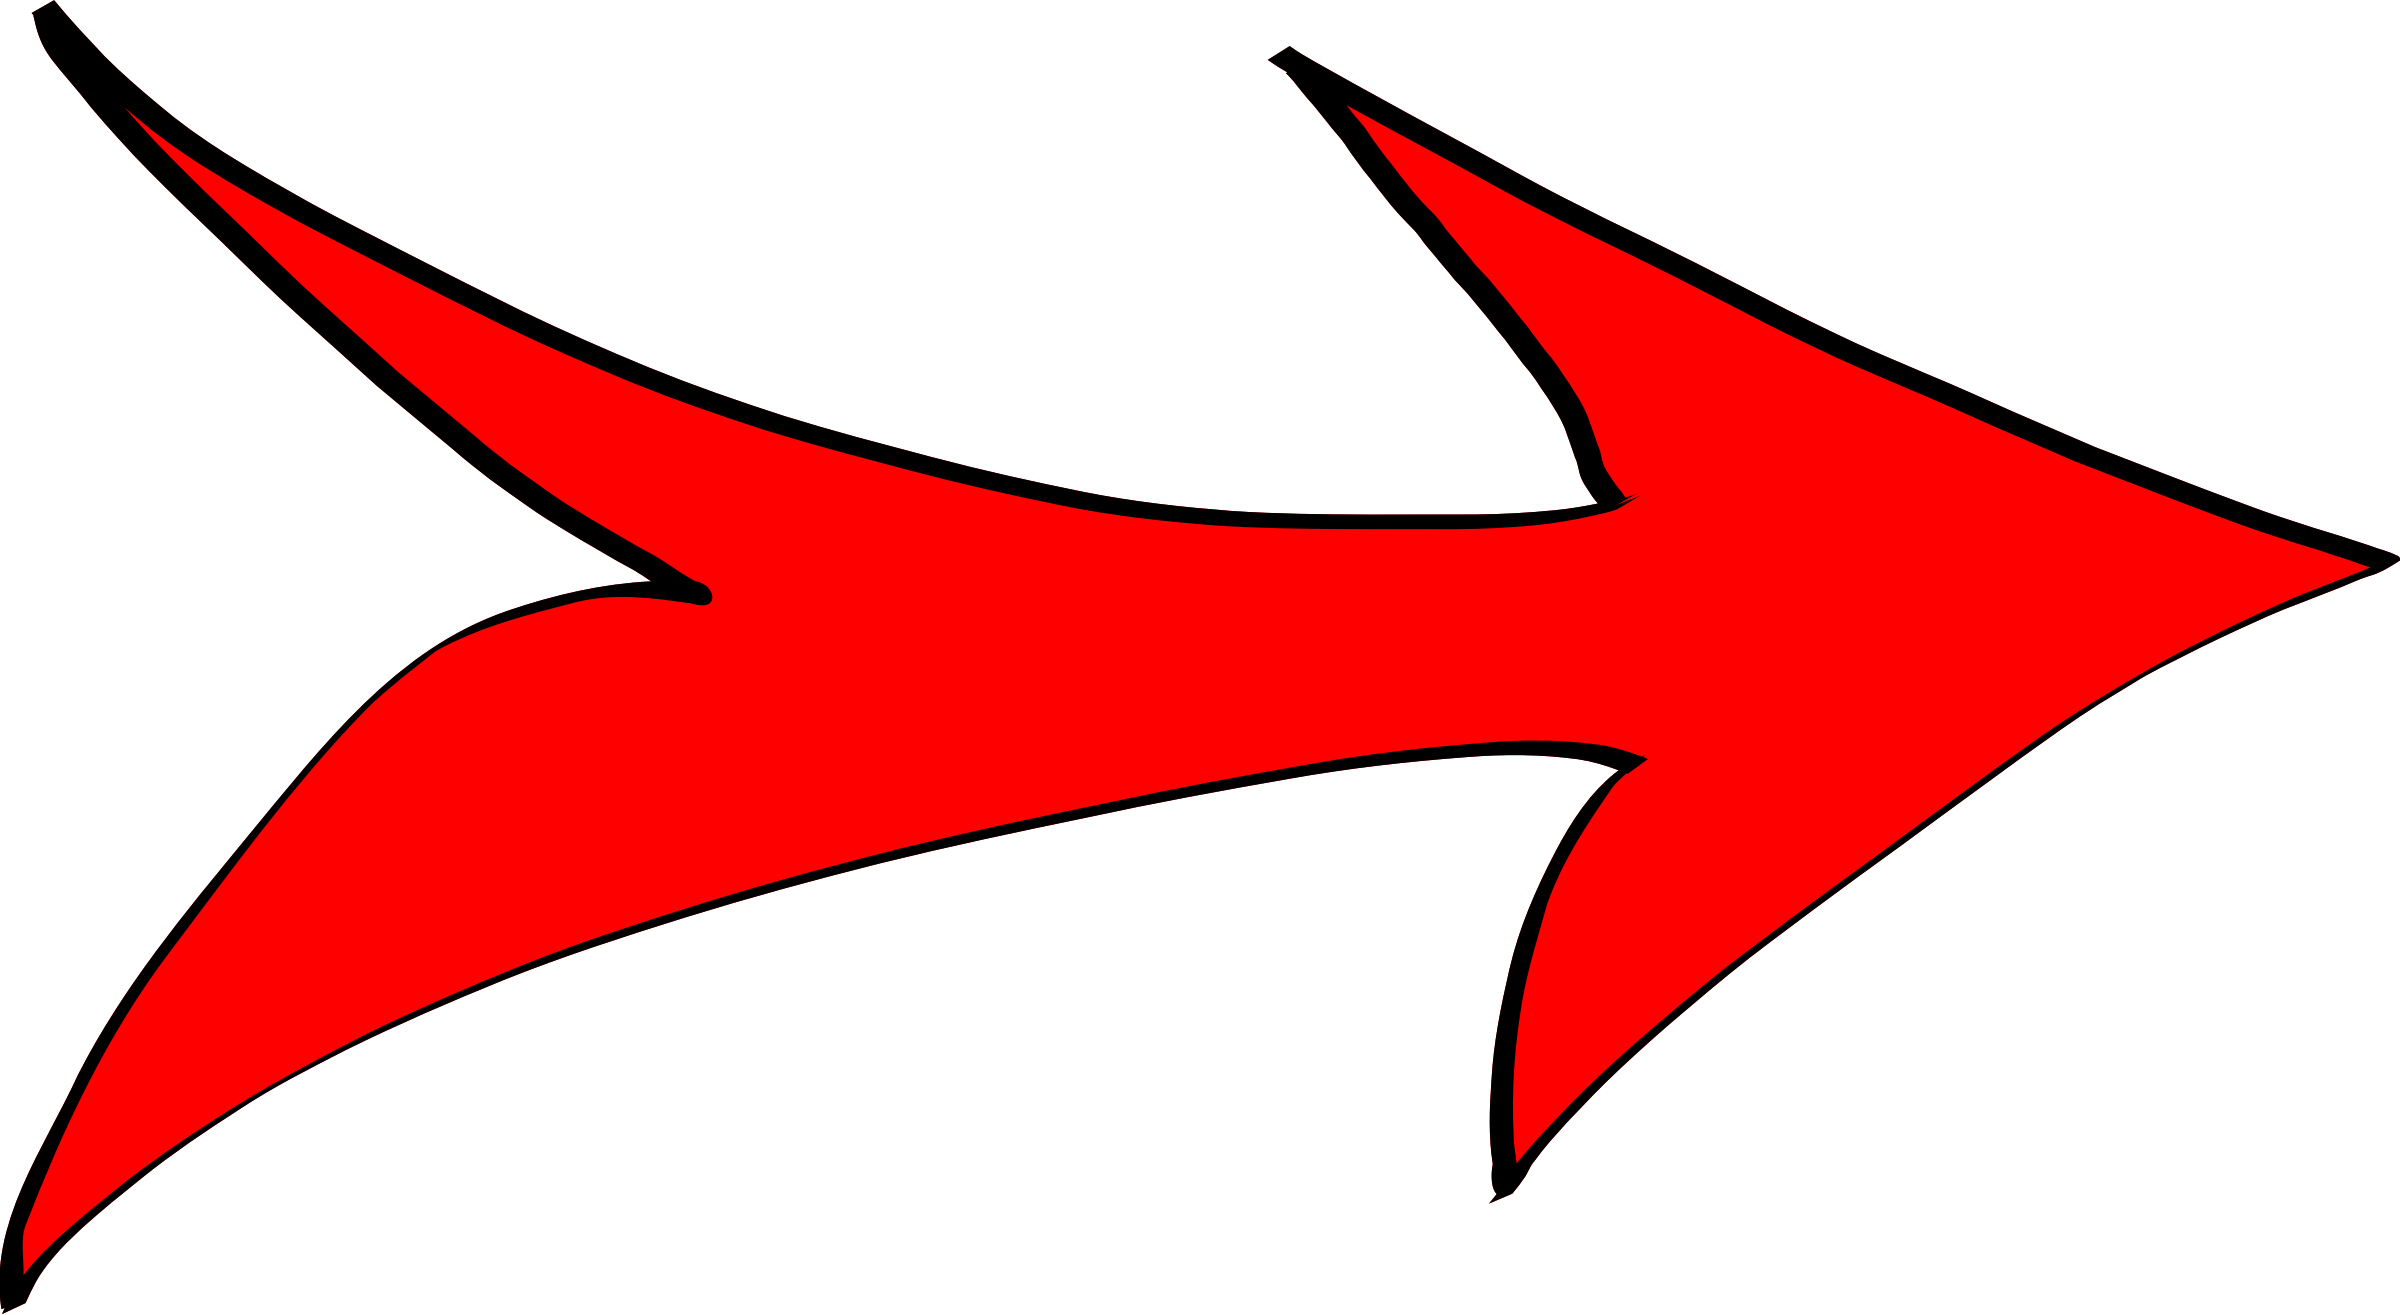 Red Arrow Vector Clipart image Free stock photo Public